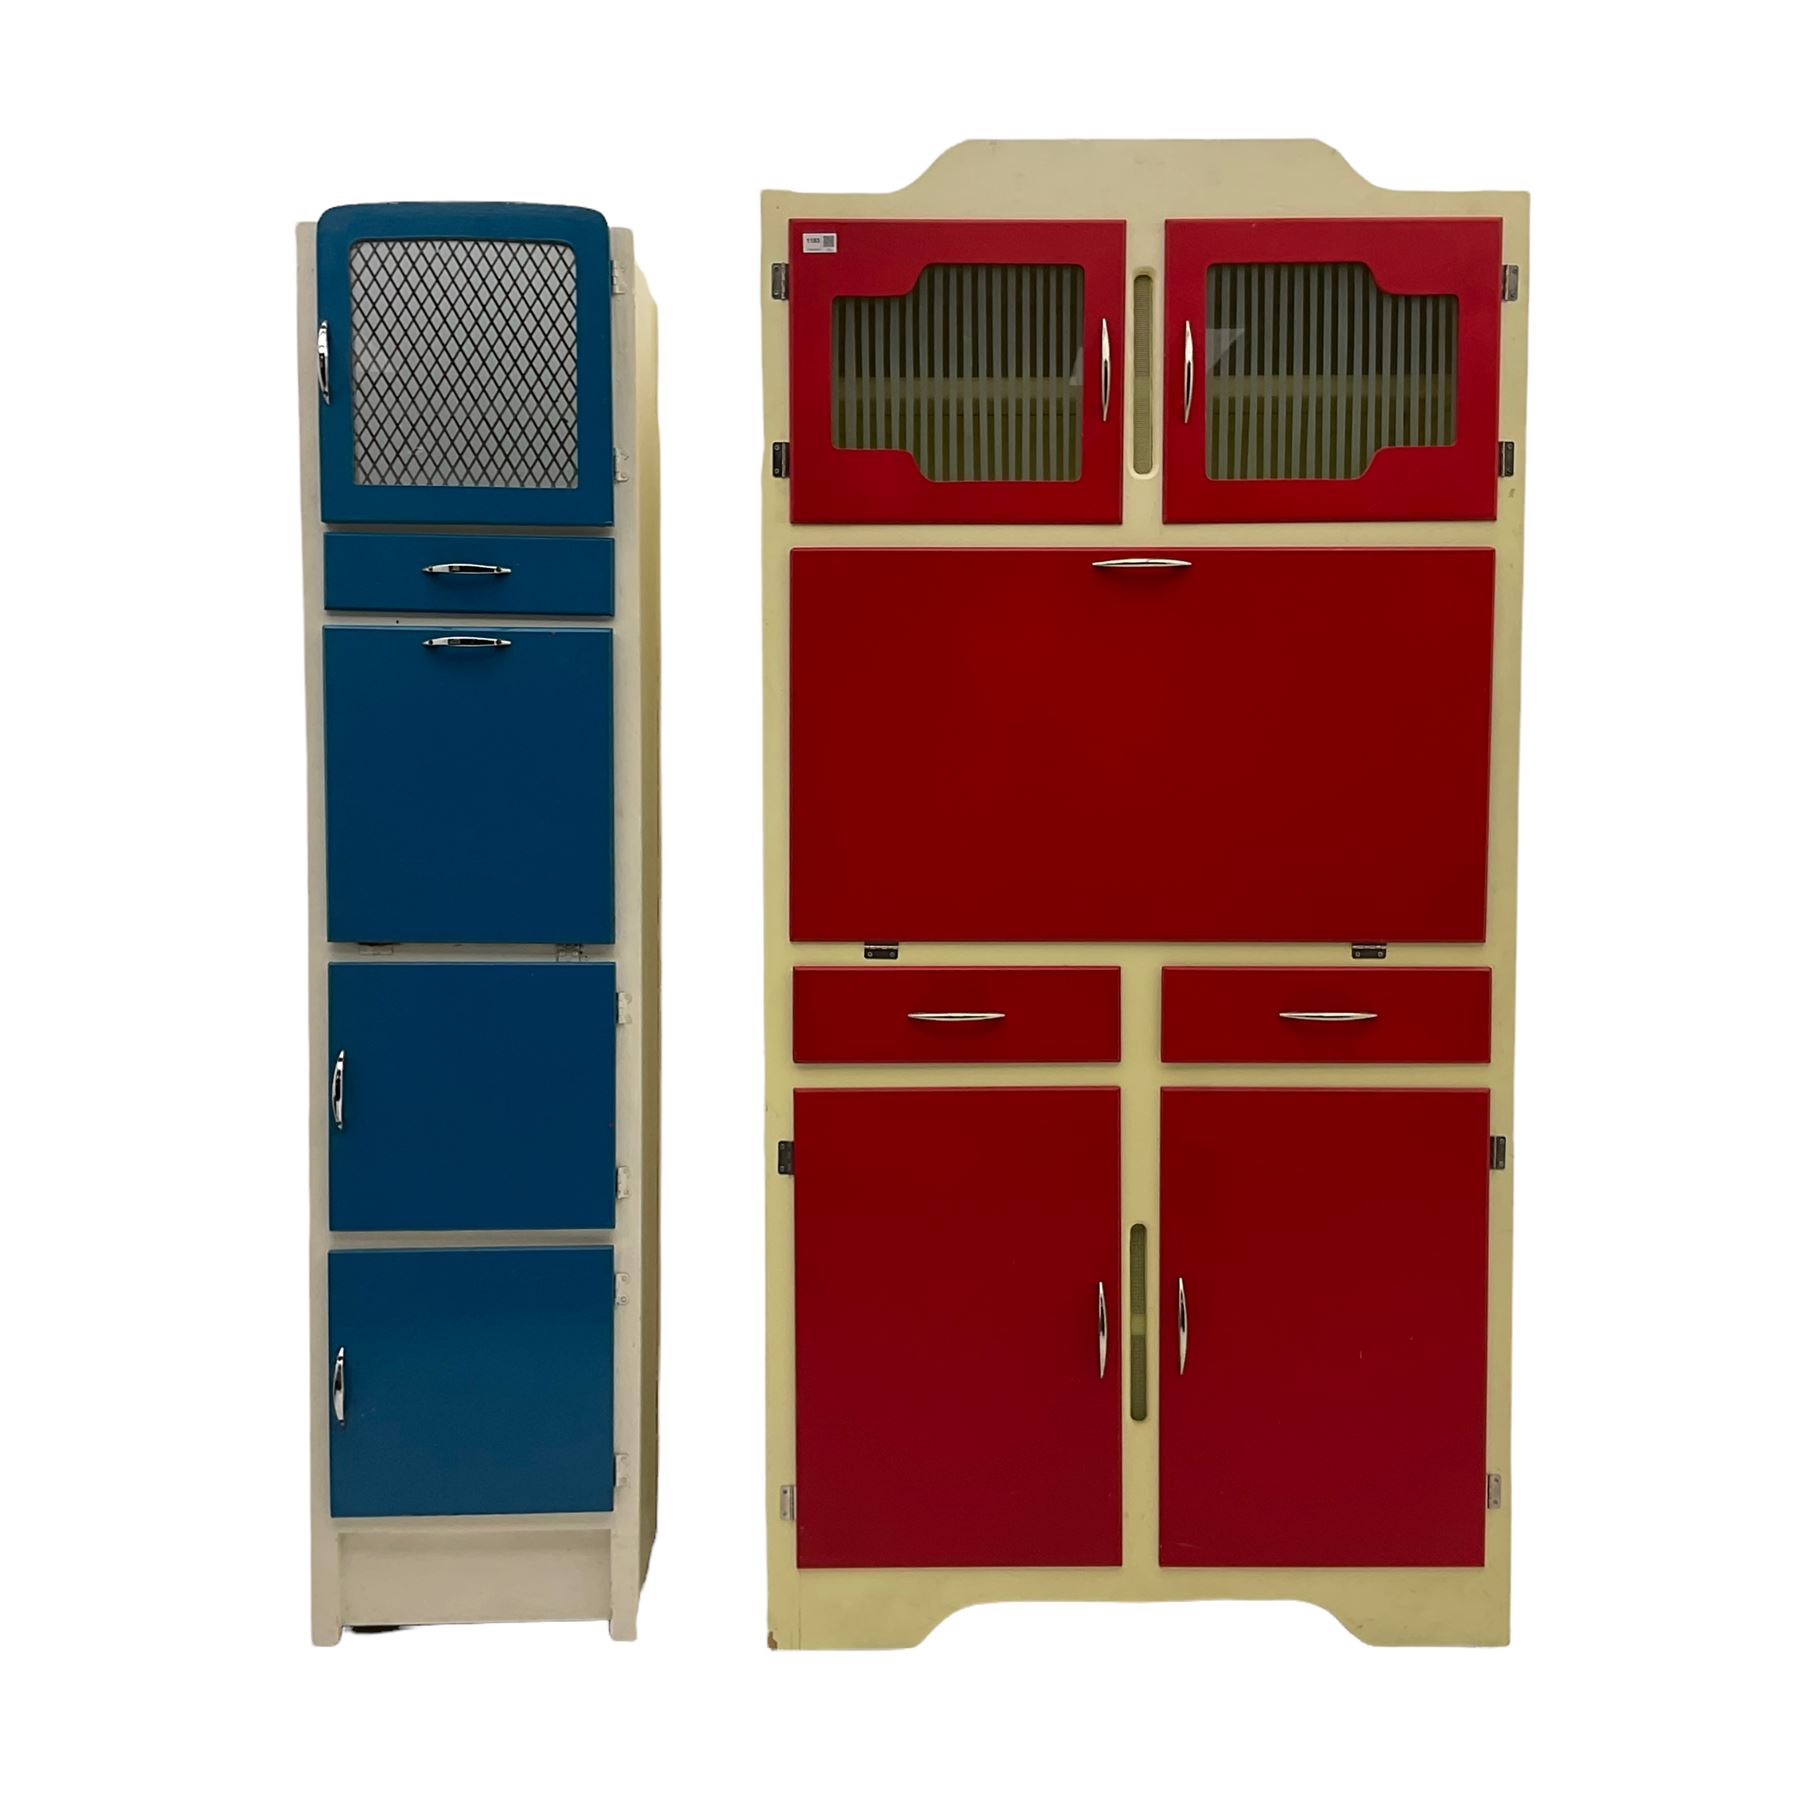 Mid-20th century painted kitchen cabinet